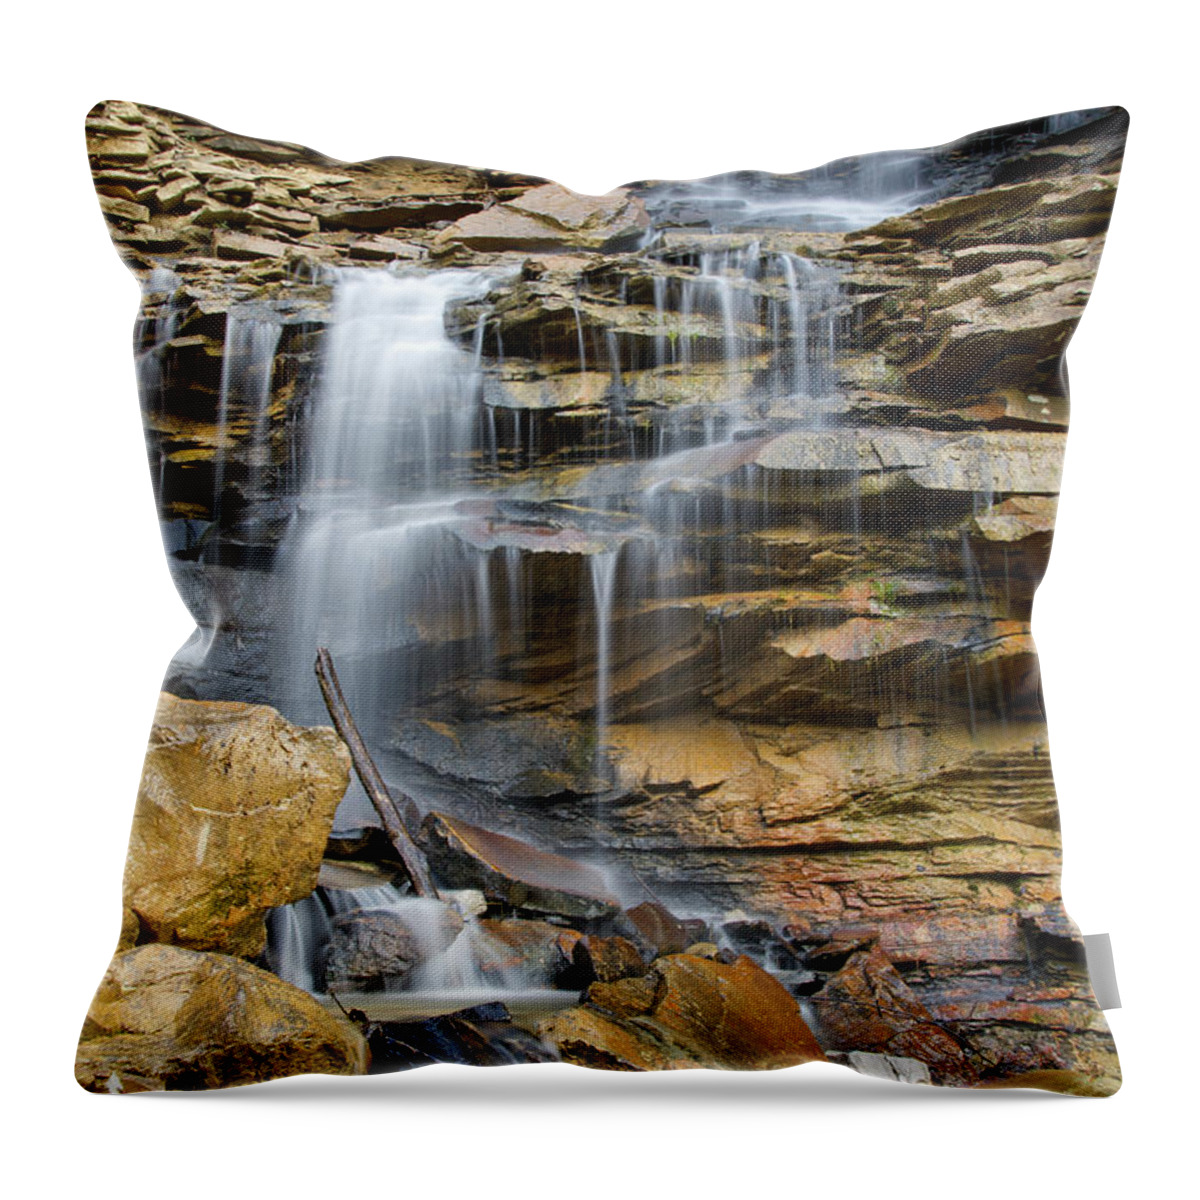 Triple Falls Throw Pillow featuring the photograph Another Waterfall On Bruce Creek 2 by Phil Perkins